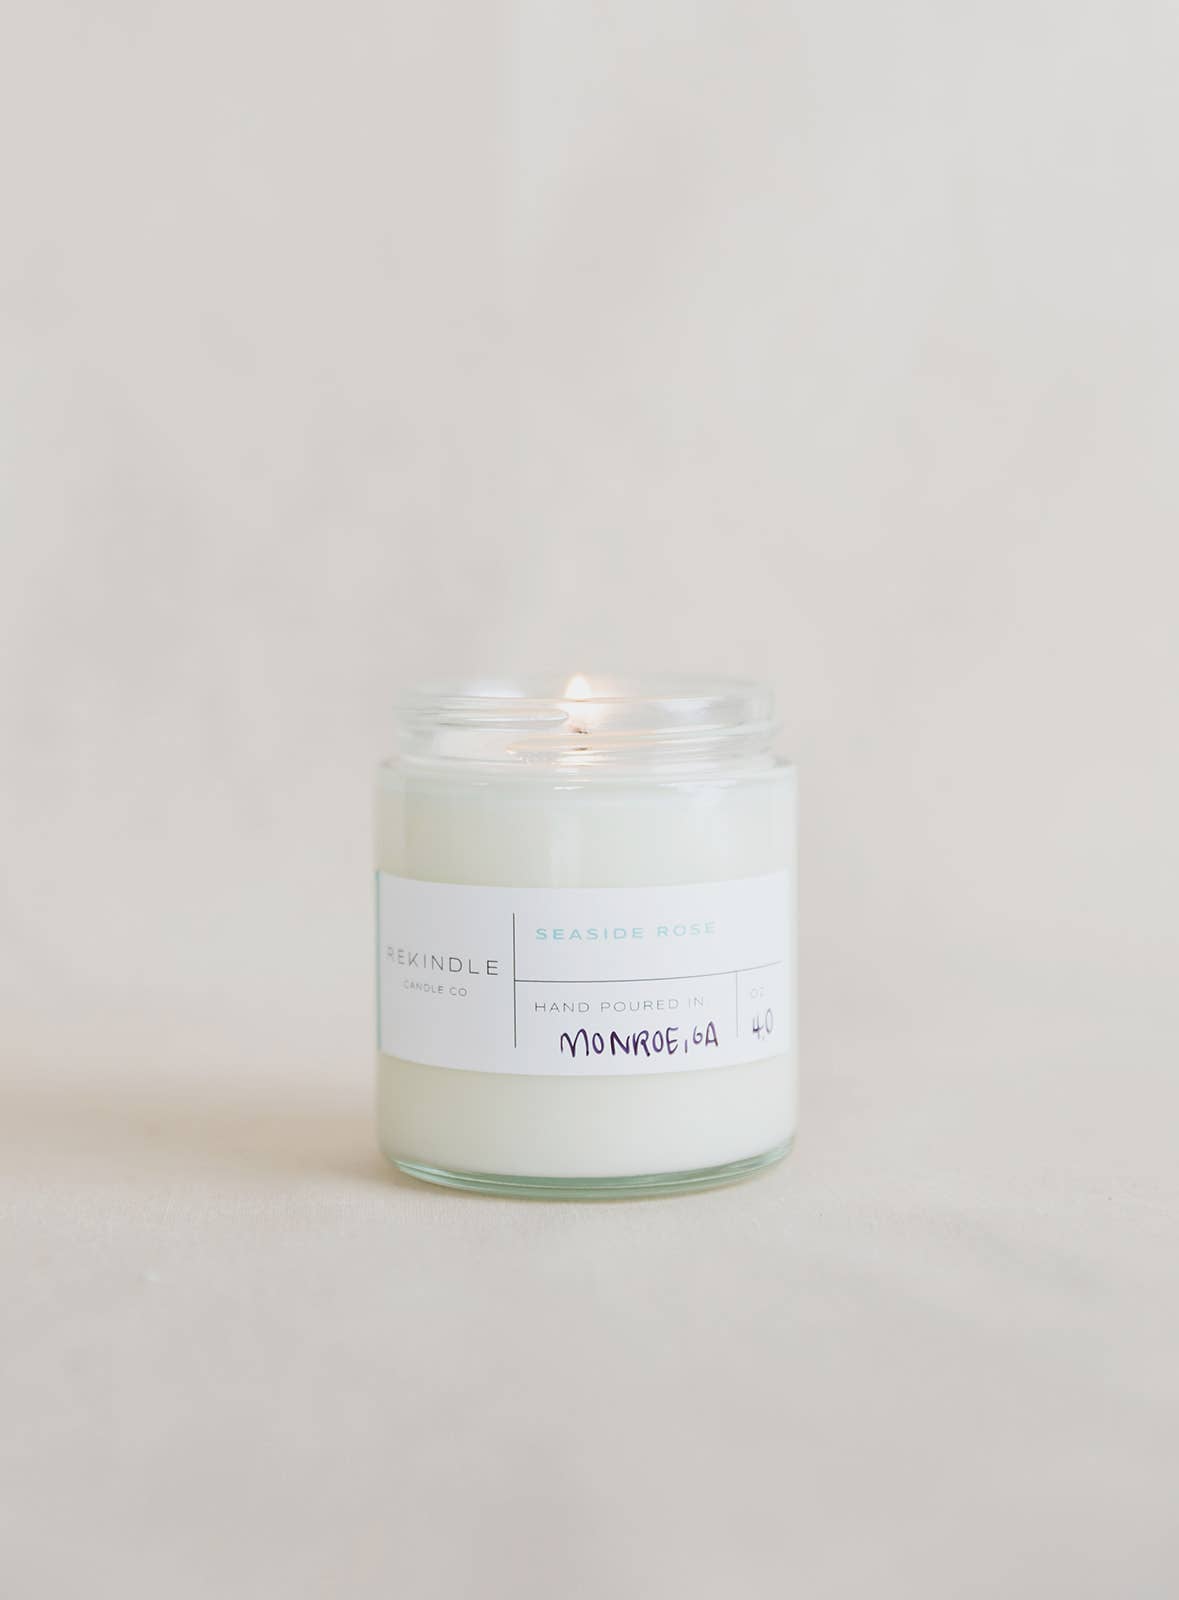 Seaside Rose Cotton Wick Soy Candle